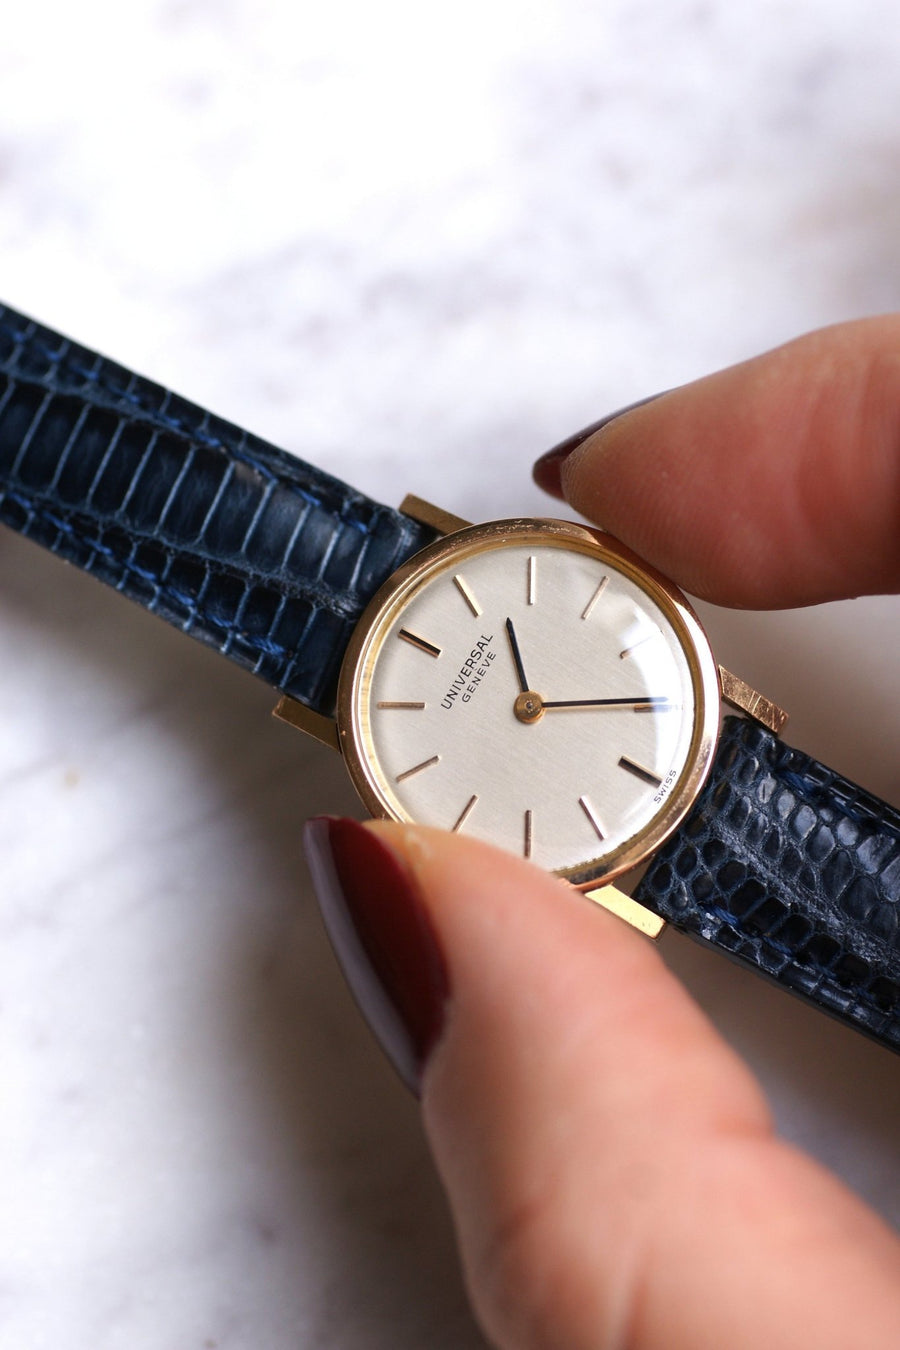 Universal lady's vintage watch in pink gold, mechanical, 70ies - Galerie Pénélope